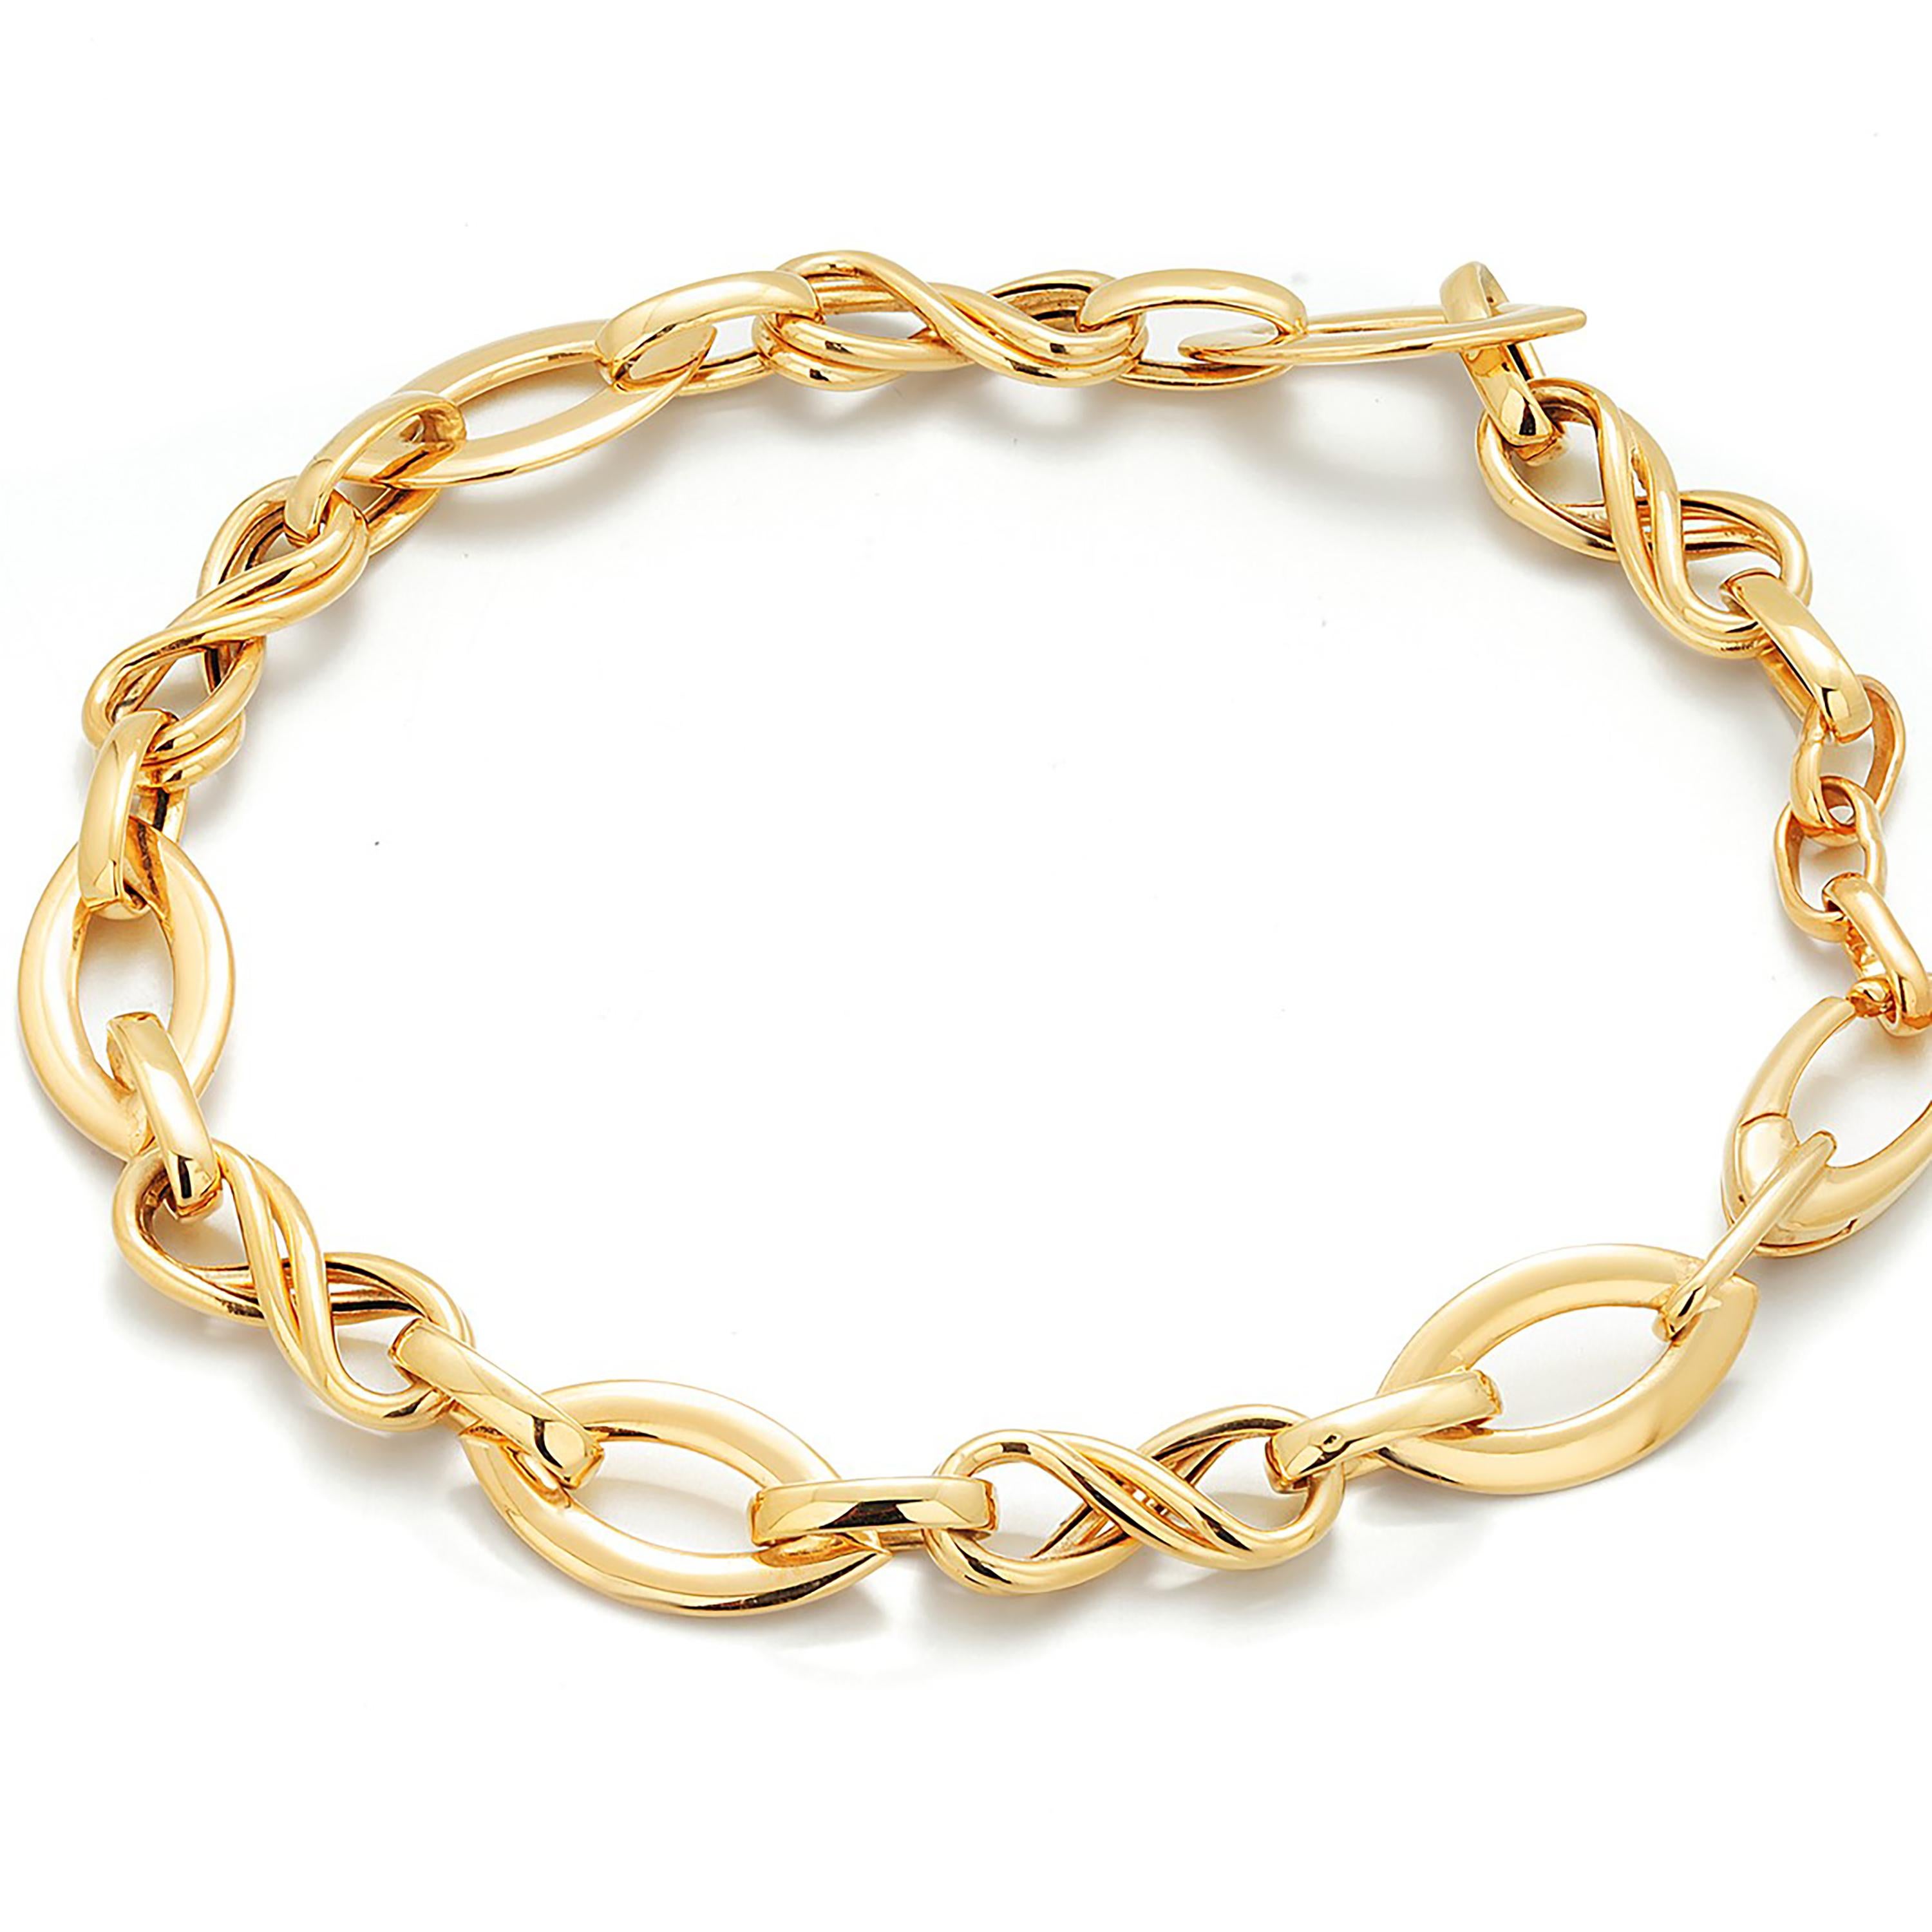 Eight Inch Link Chain Bracelet Invisible Catch 14 Karat Yellow Gold  In Good Condition For Sale In New York, NY